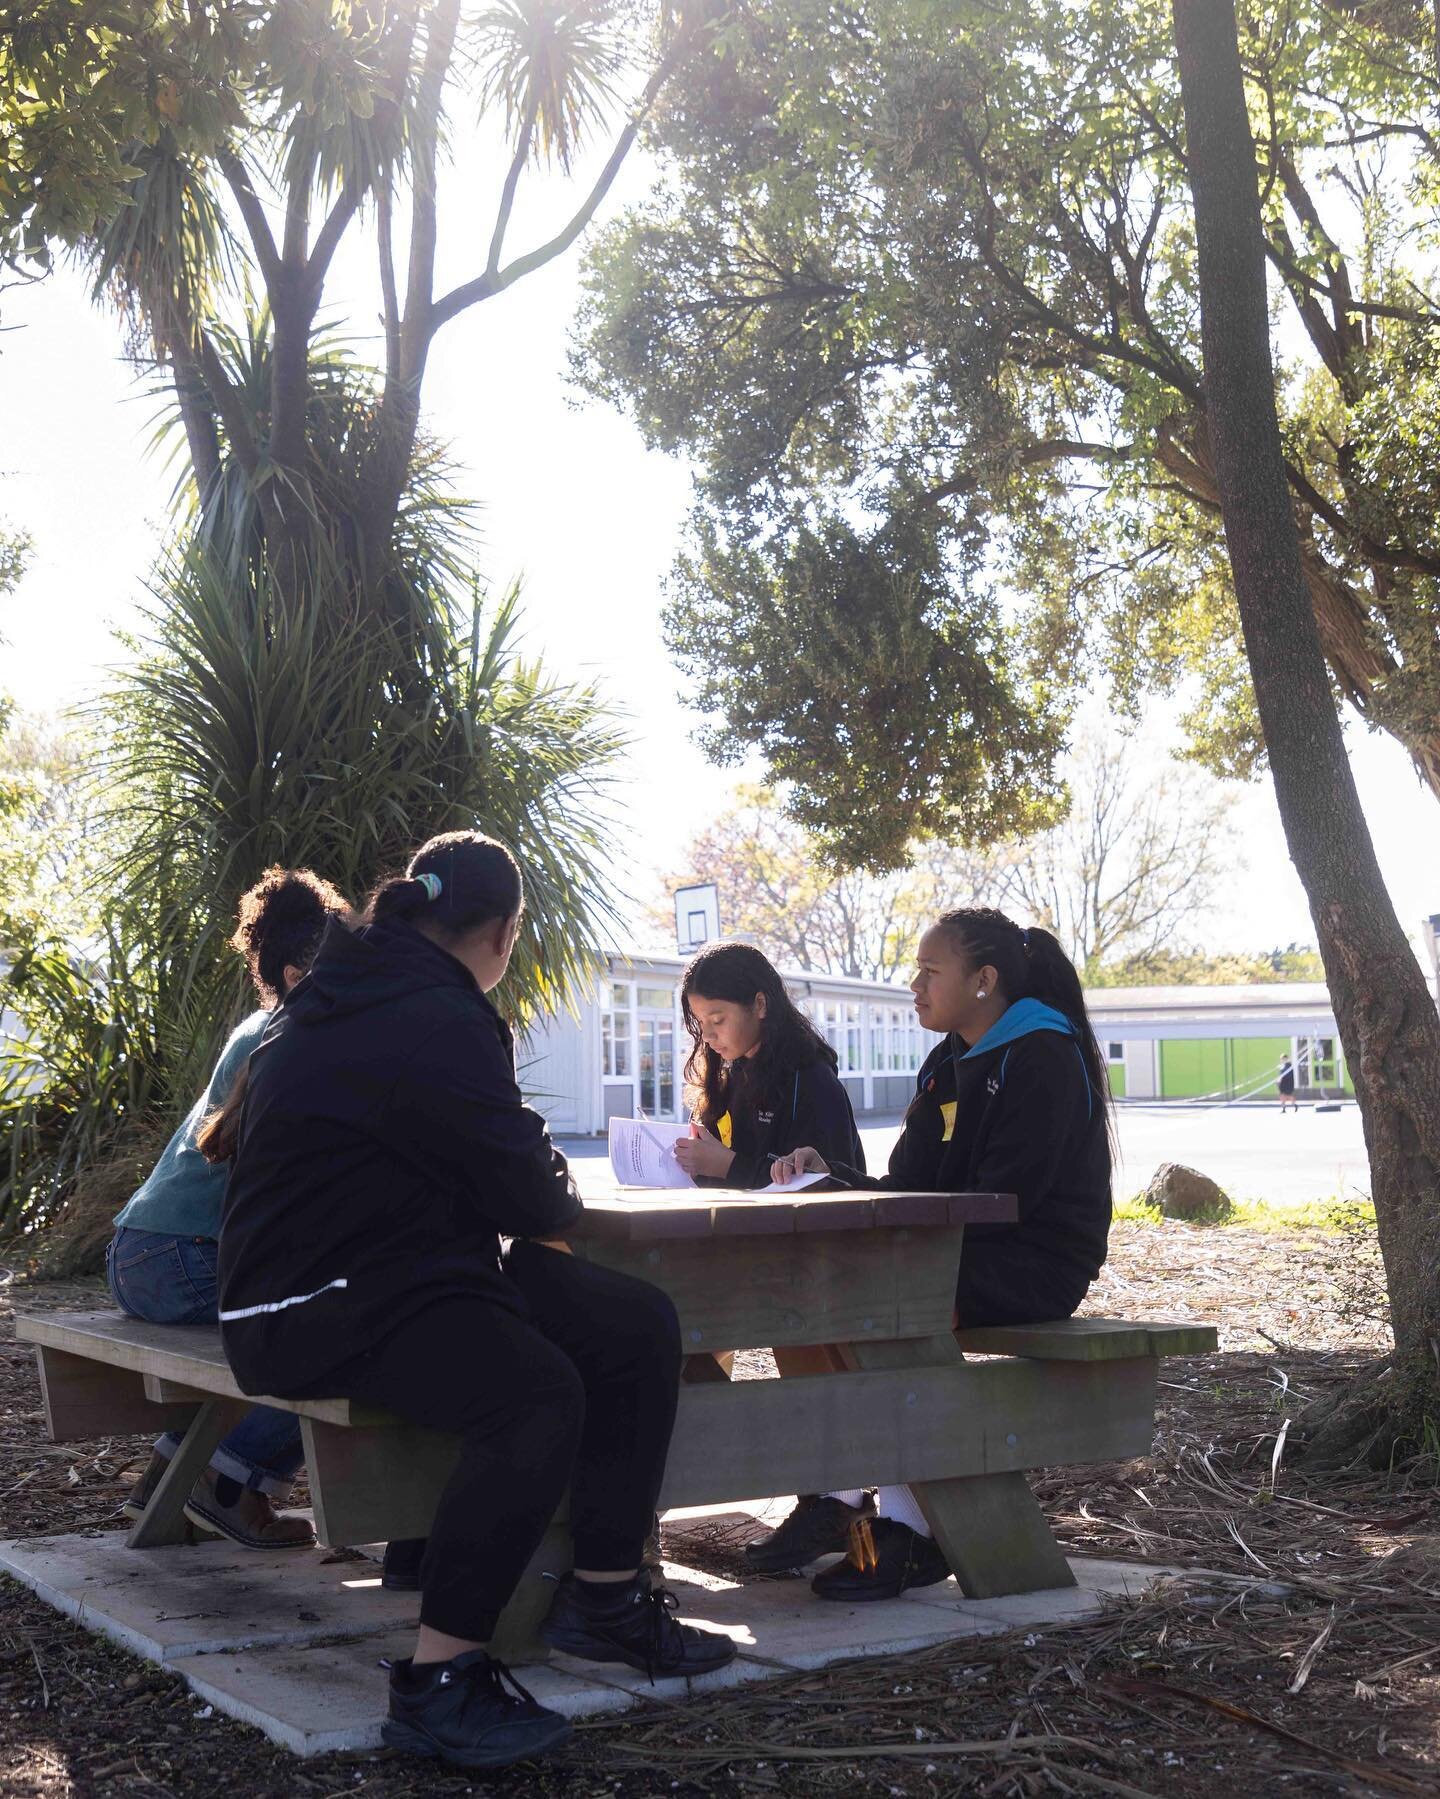 Day One of Place Cadets at Te Kōmanawa Rowley Avenue School! 💫

Exploring (and reflecting on) the outdoor play space with Kaiako Sophie and these enthusiastic Year 6 tamariki! ✨

@te_komanawa_rowley_school 
@rosiemurphy.me 
@gather_landscape_archite